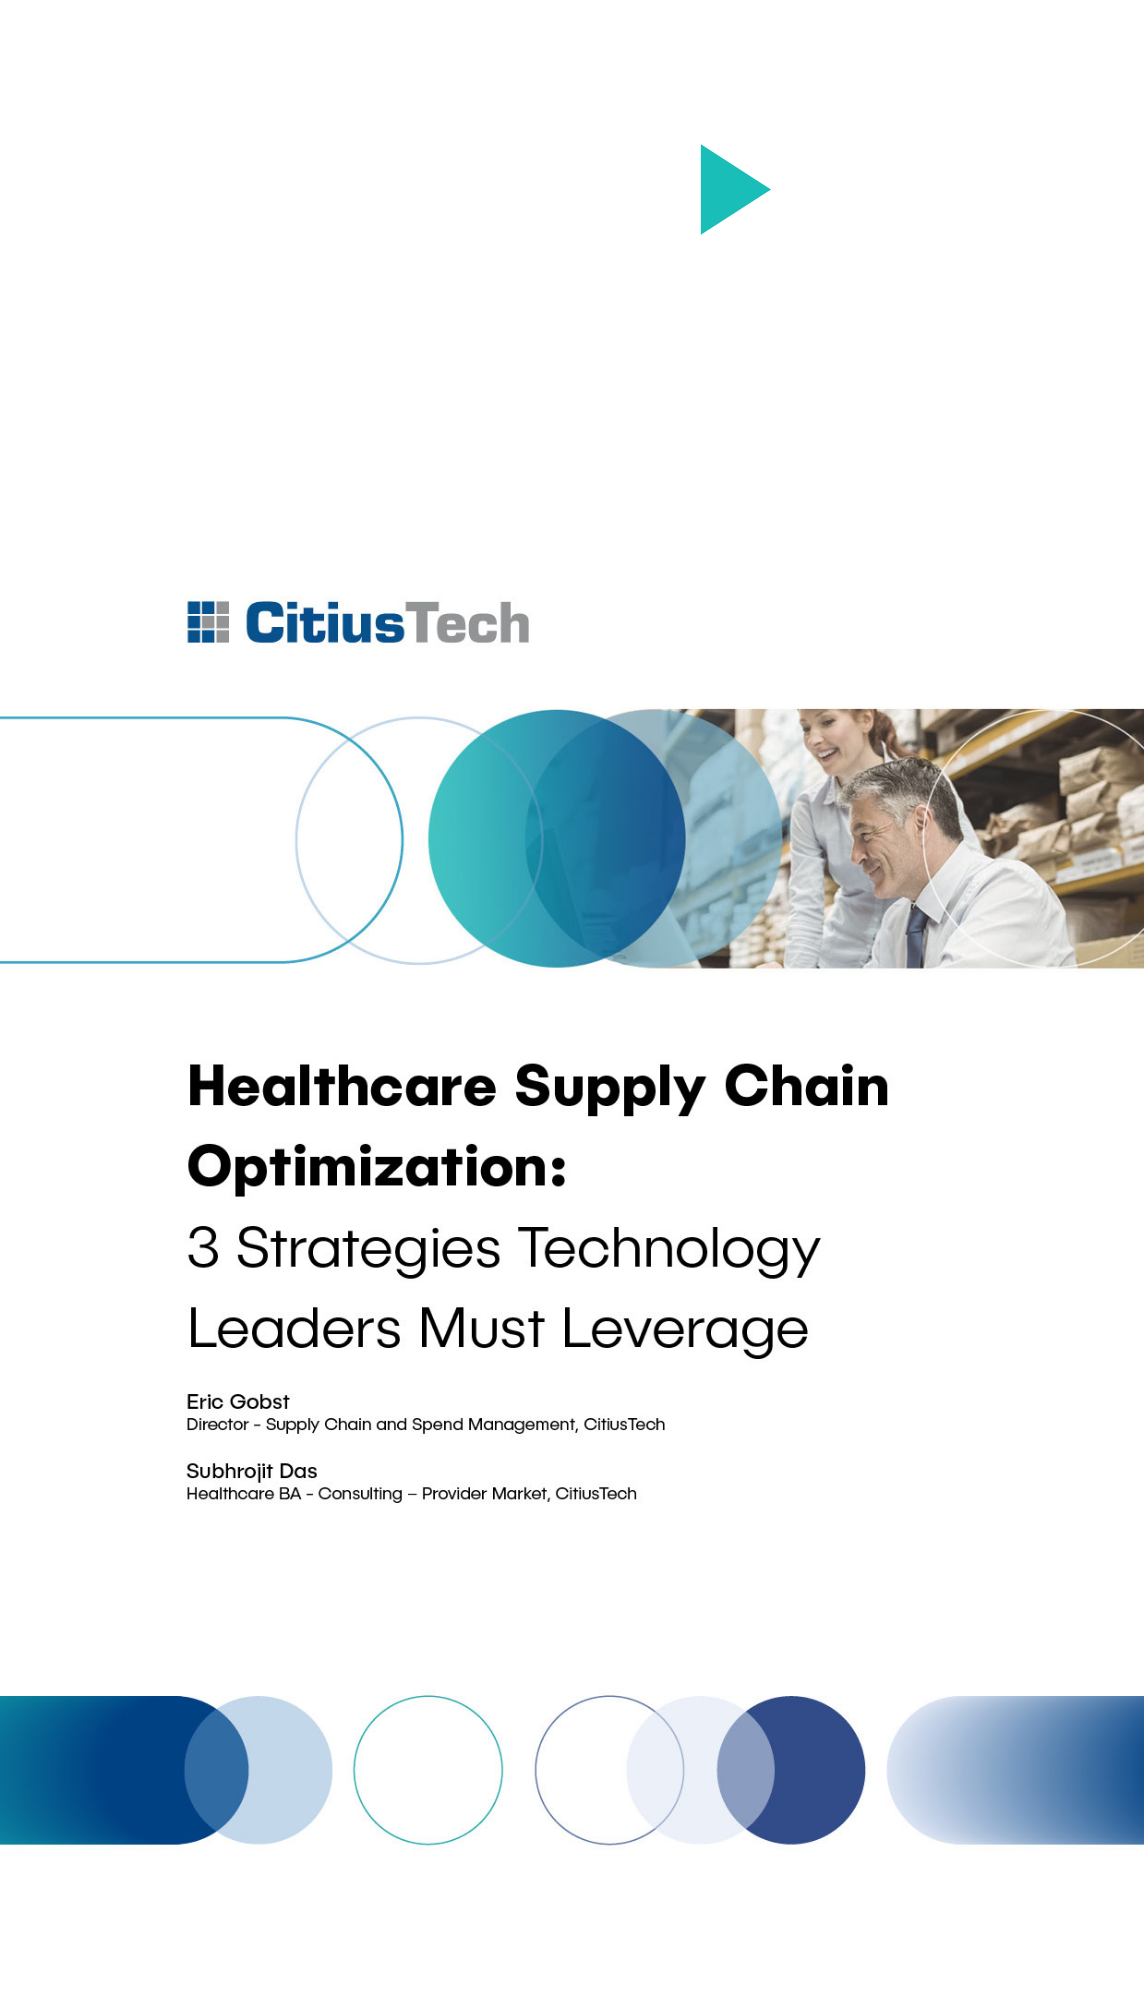 Healthcare Supply Chain Optimization 3 Strategies Technology Leaders Must Leverage